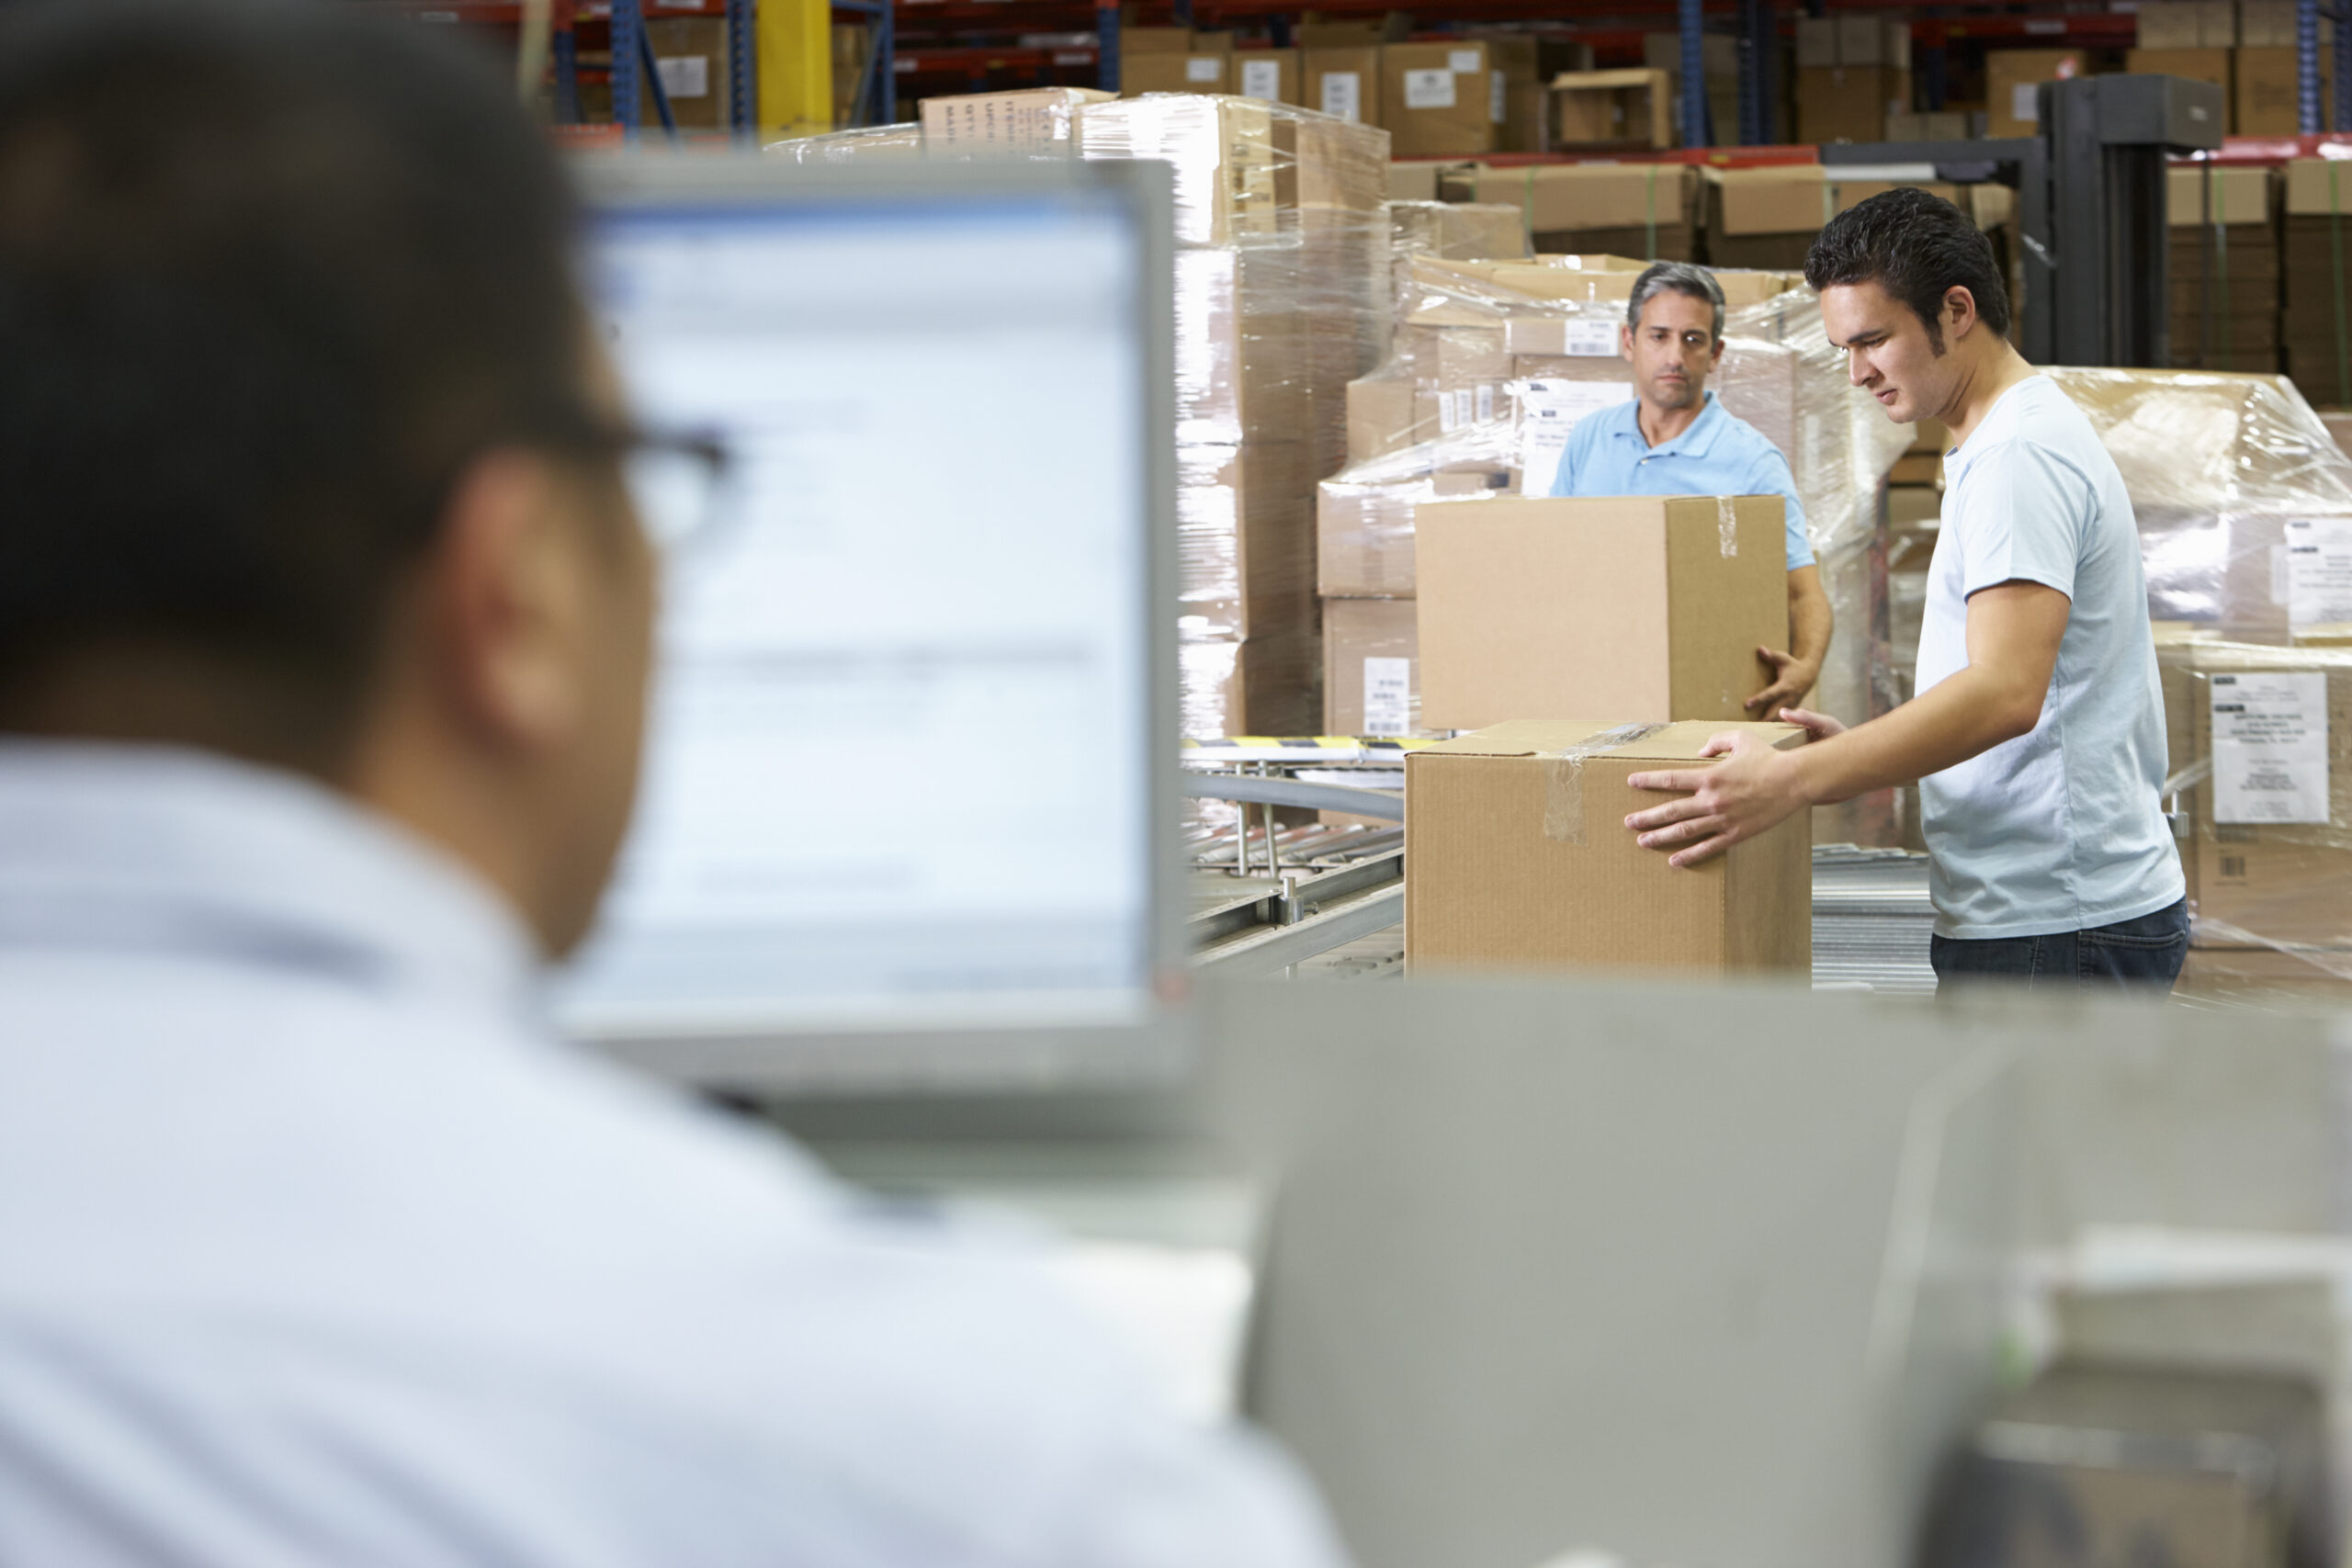 Warehouse workers package orders in boxes while a man uses an ERP on the computer. 